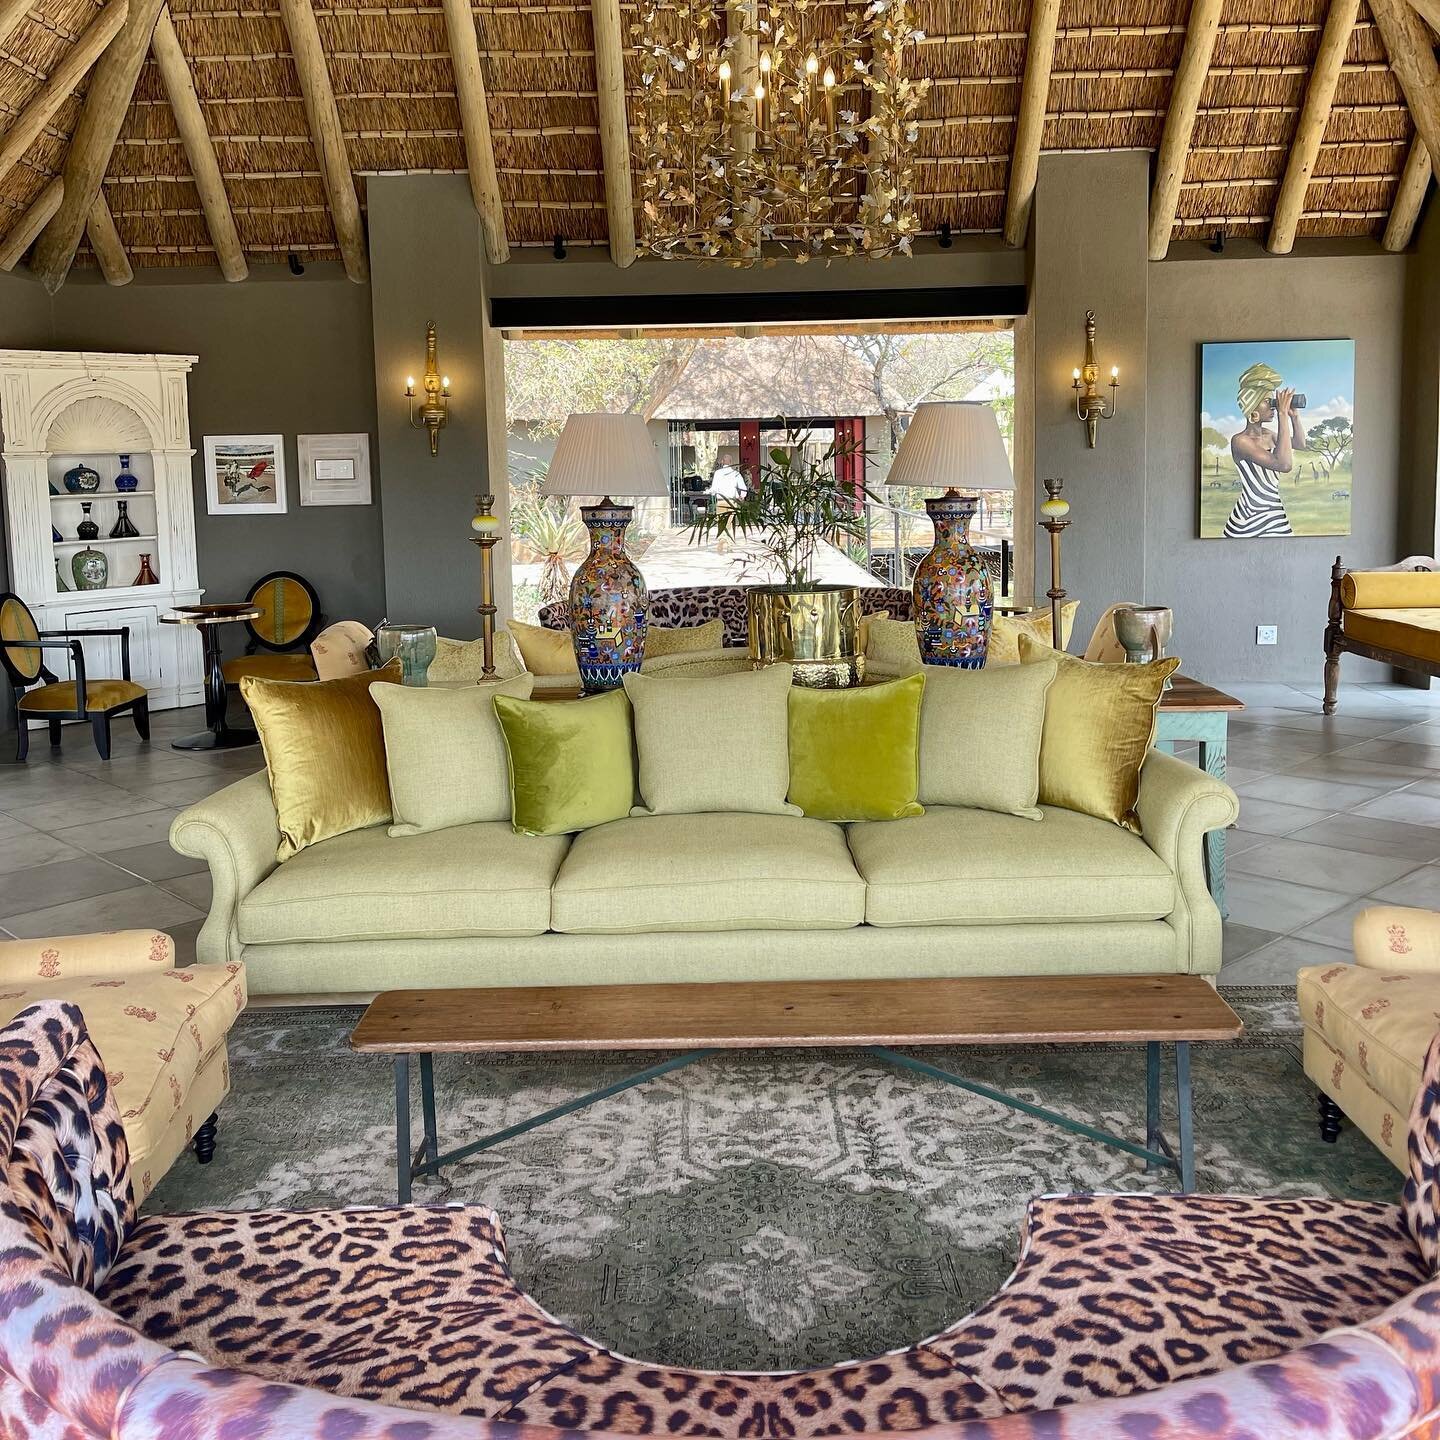 Waterside, the newest addition to the The Royal Portfolio is absolutely stunning!! We are in love with this fabulous property, located on the Western Border of the Greater Kruger National Park in South Africa. 

🐘Waterside&rsquo;s 12 bedroom lodge c